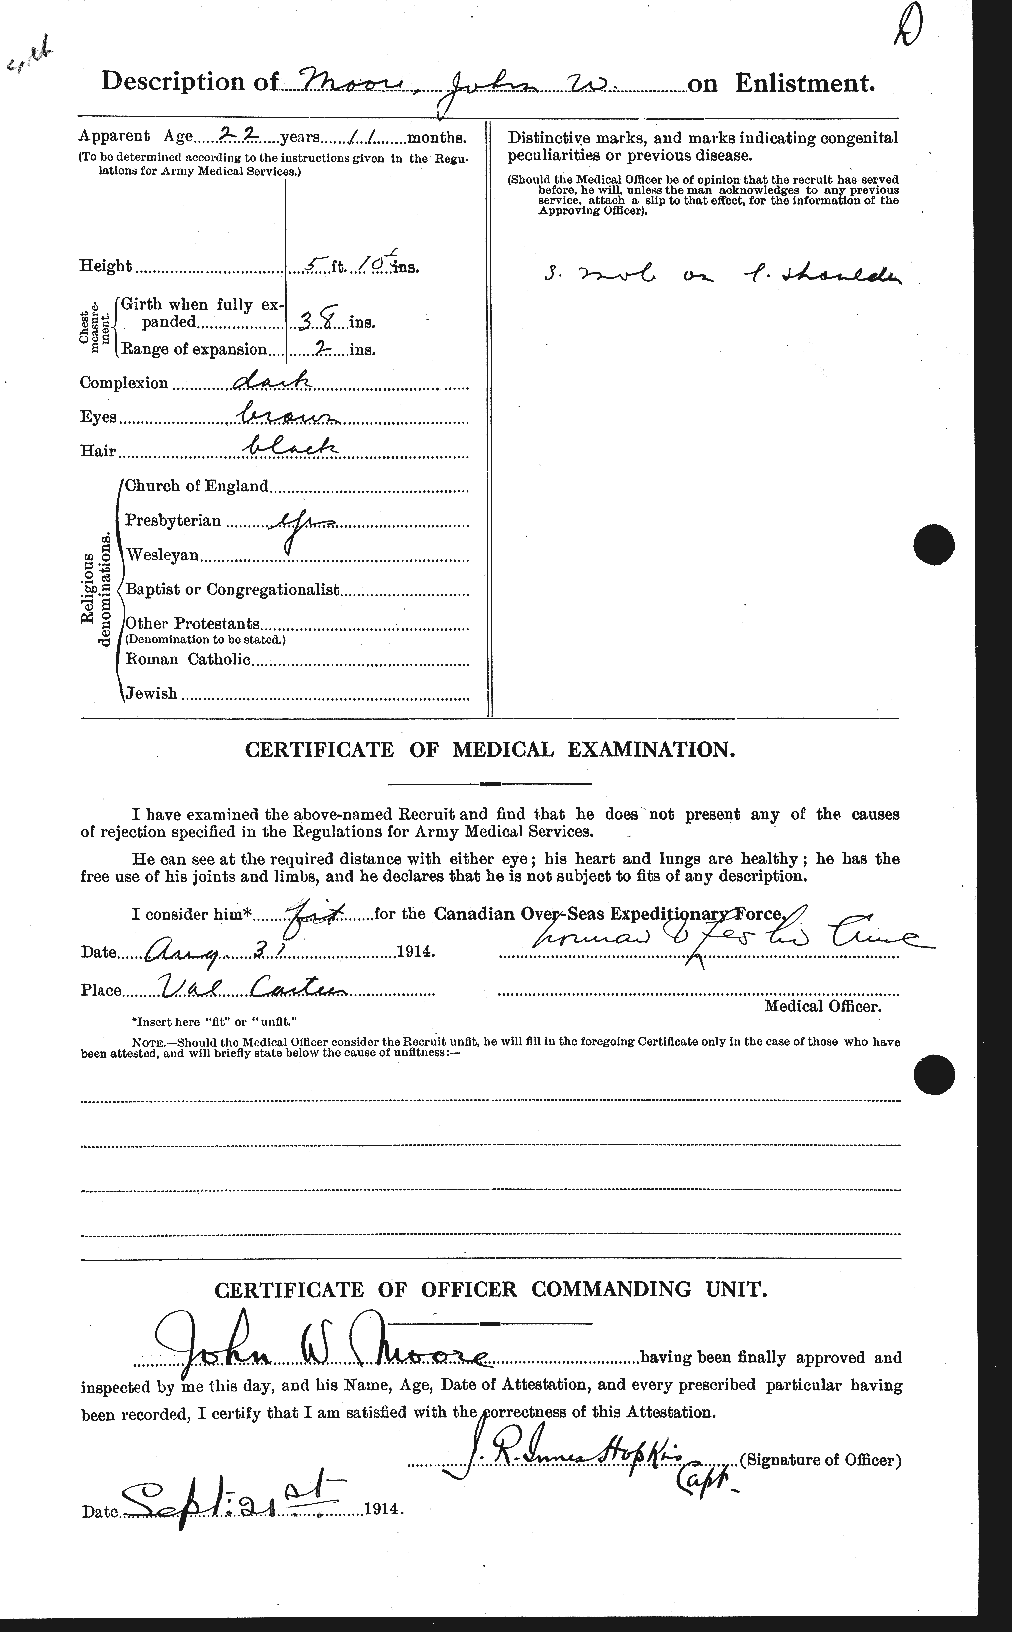 Personnel Records of the First World War - CEF 503353b